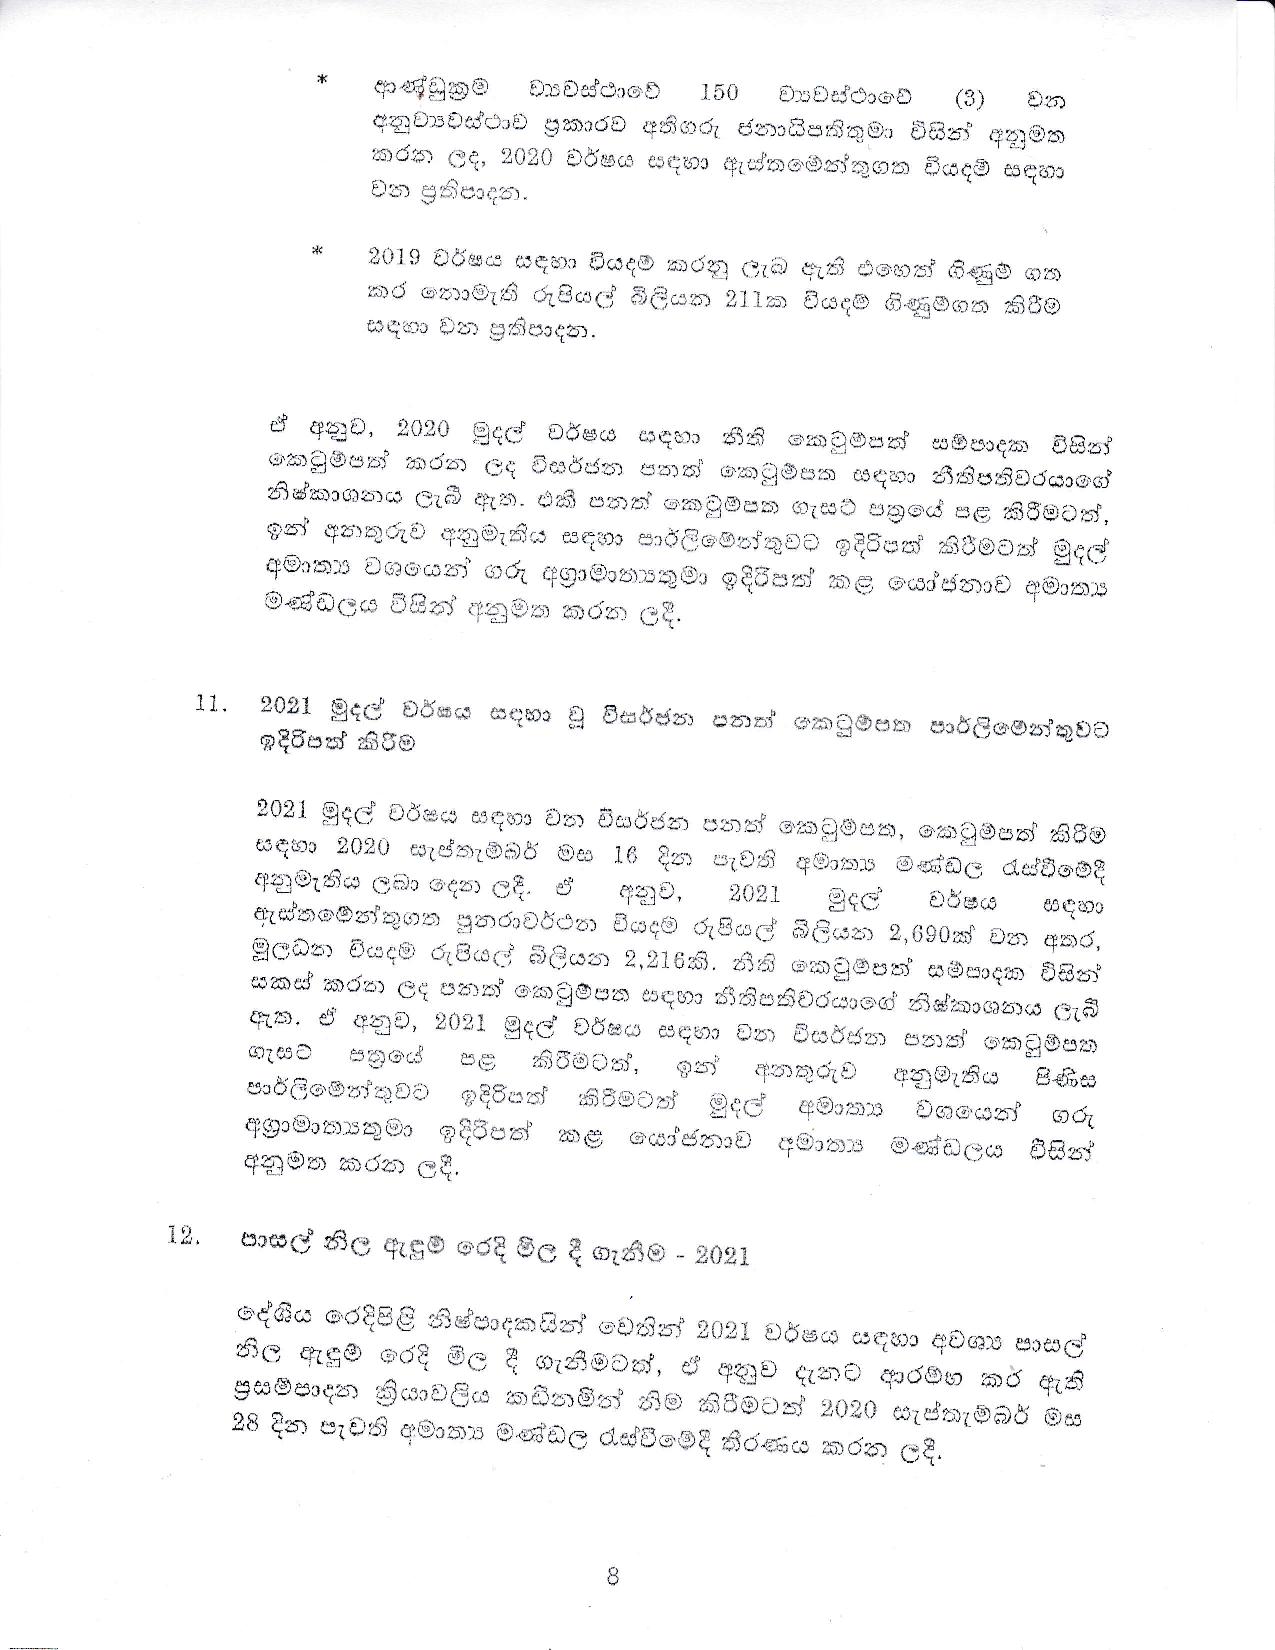 Cabinet Decision on 05.10.2020 page 008